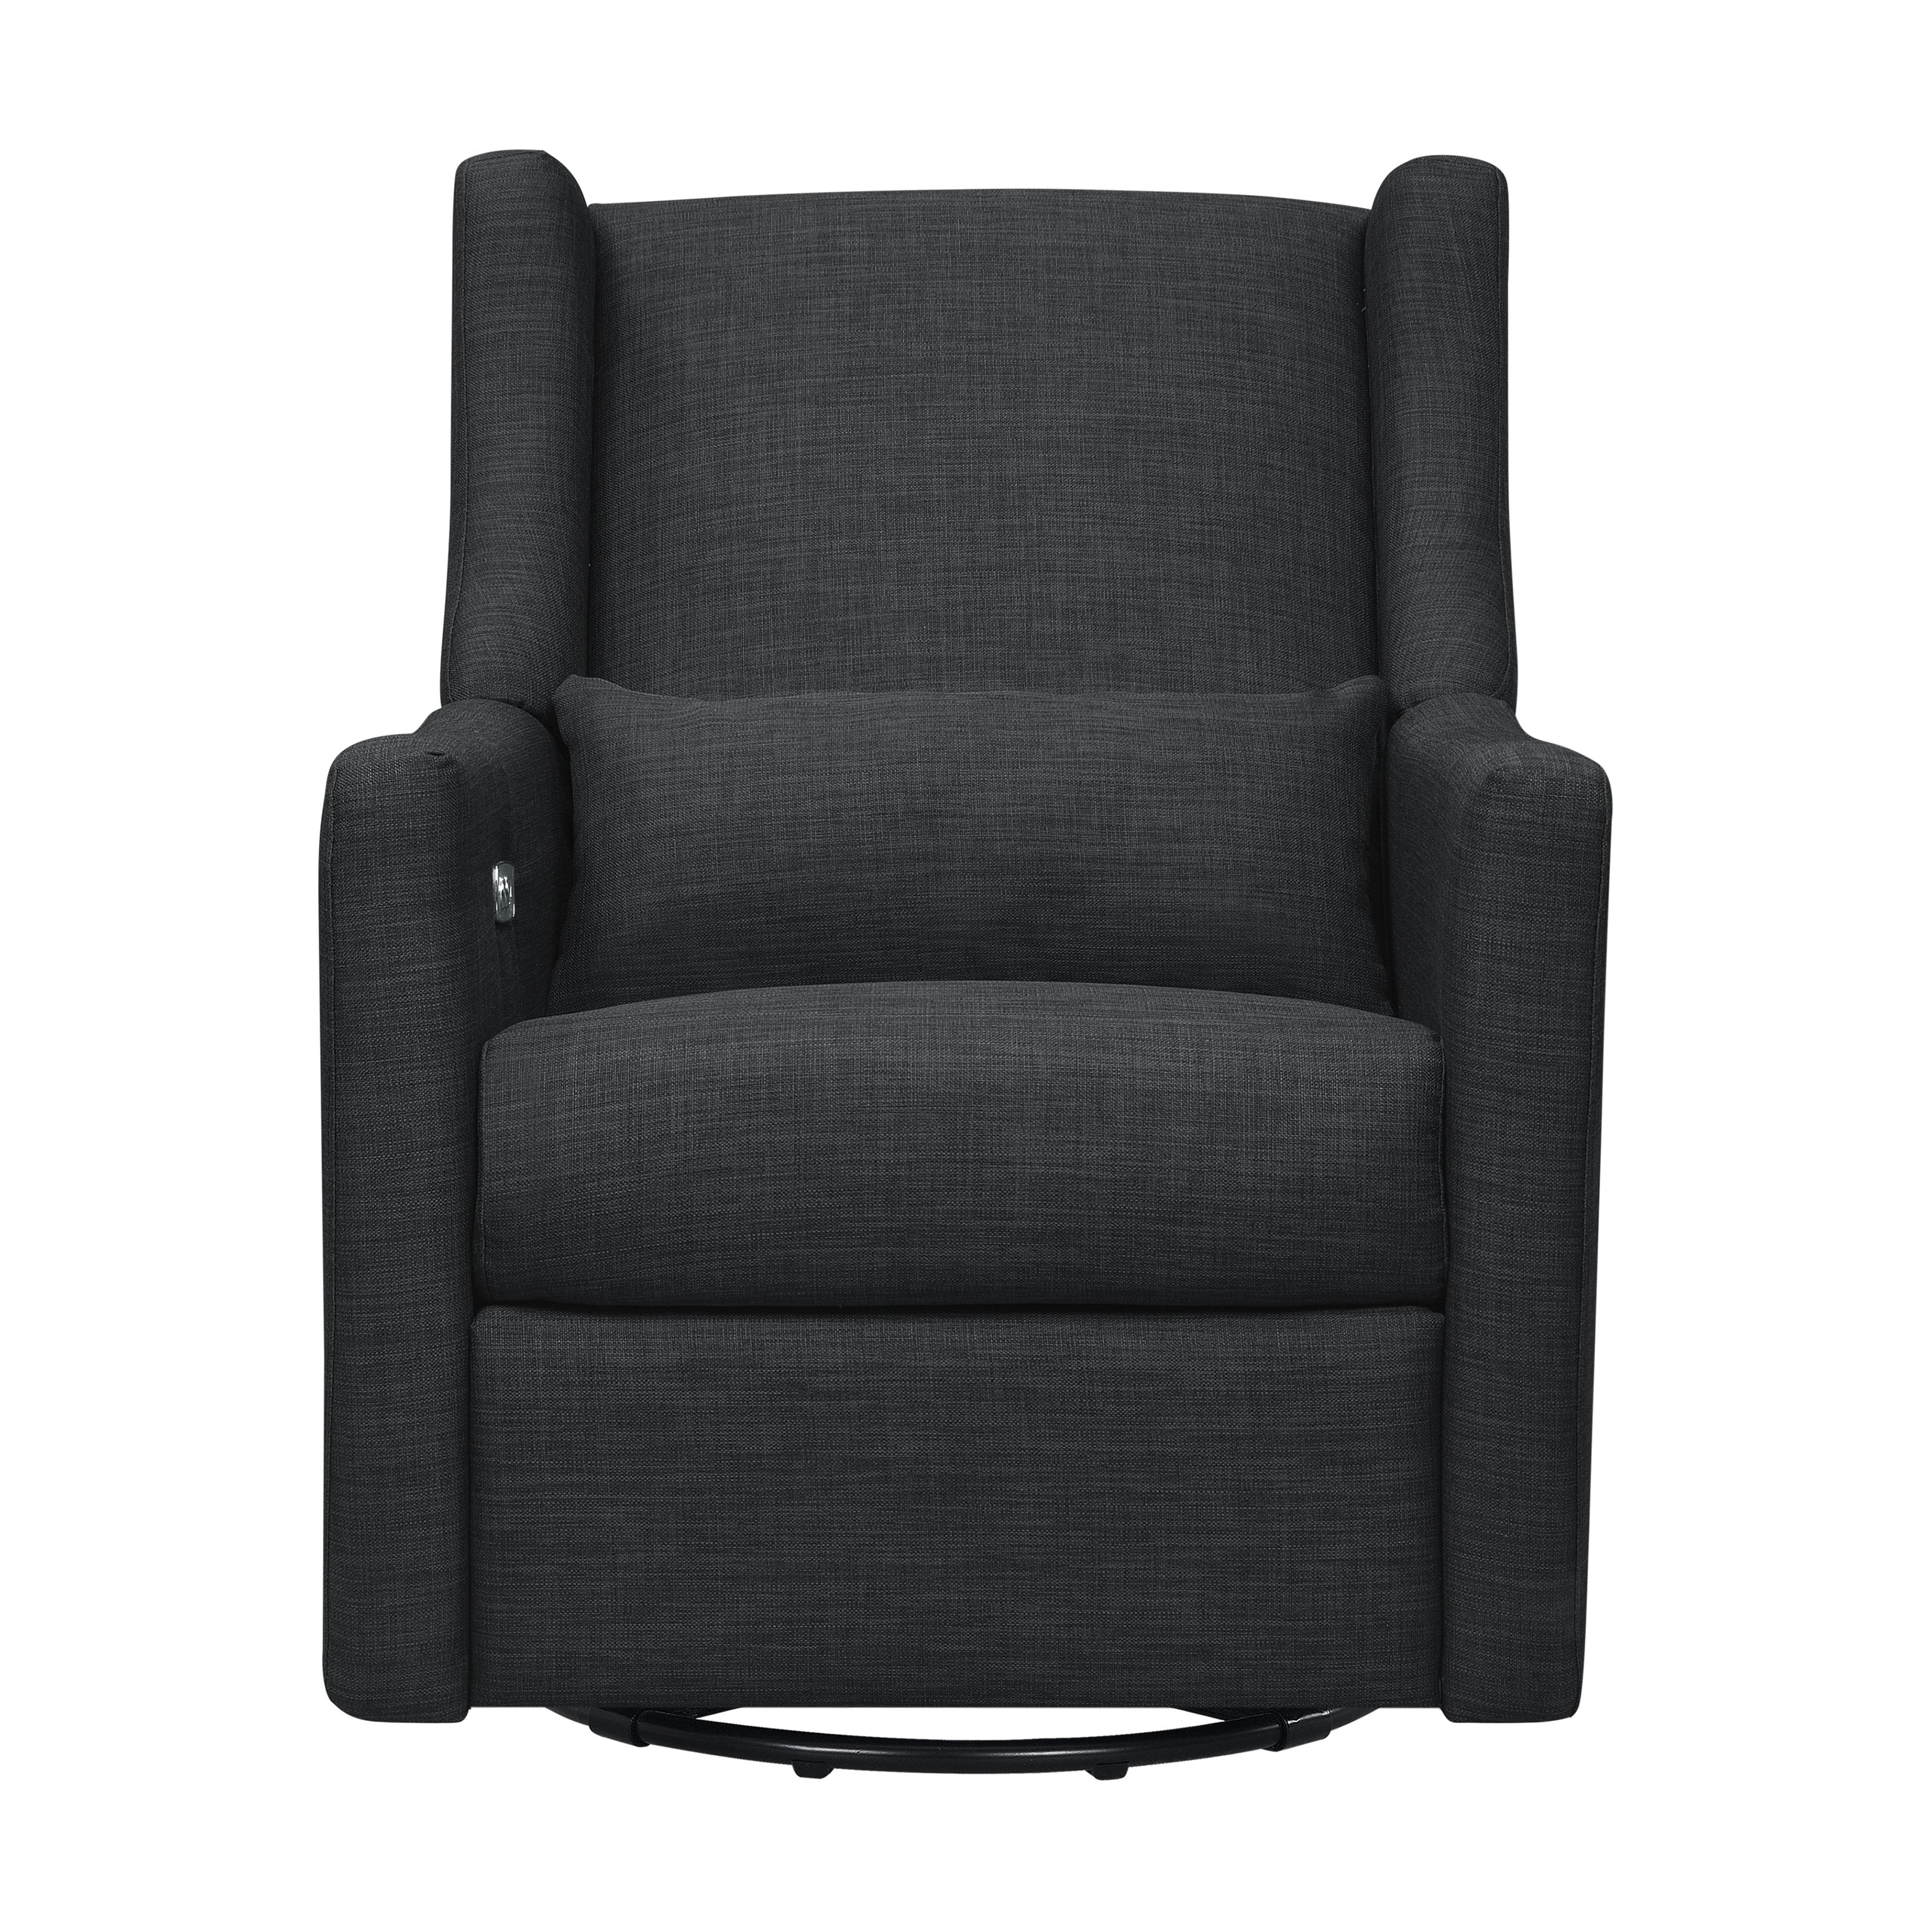 Kiwi Glider Recliner With Electronic/usb Control - Coal Grey